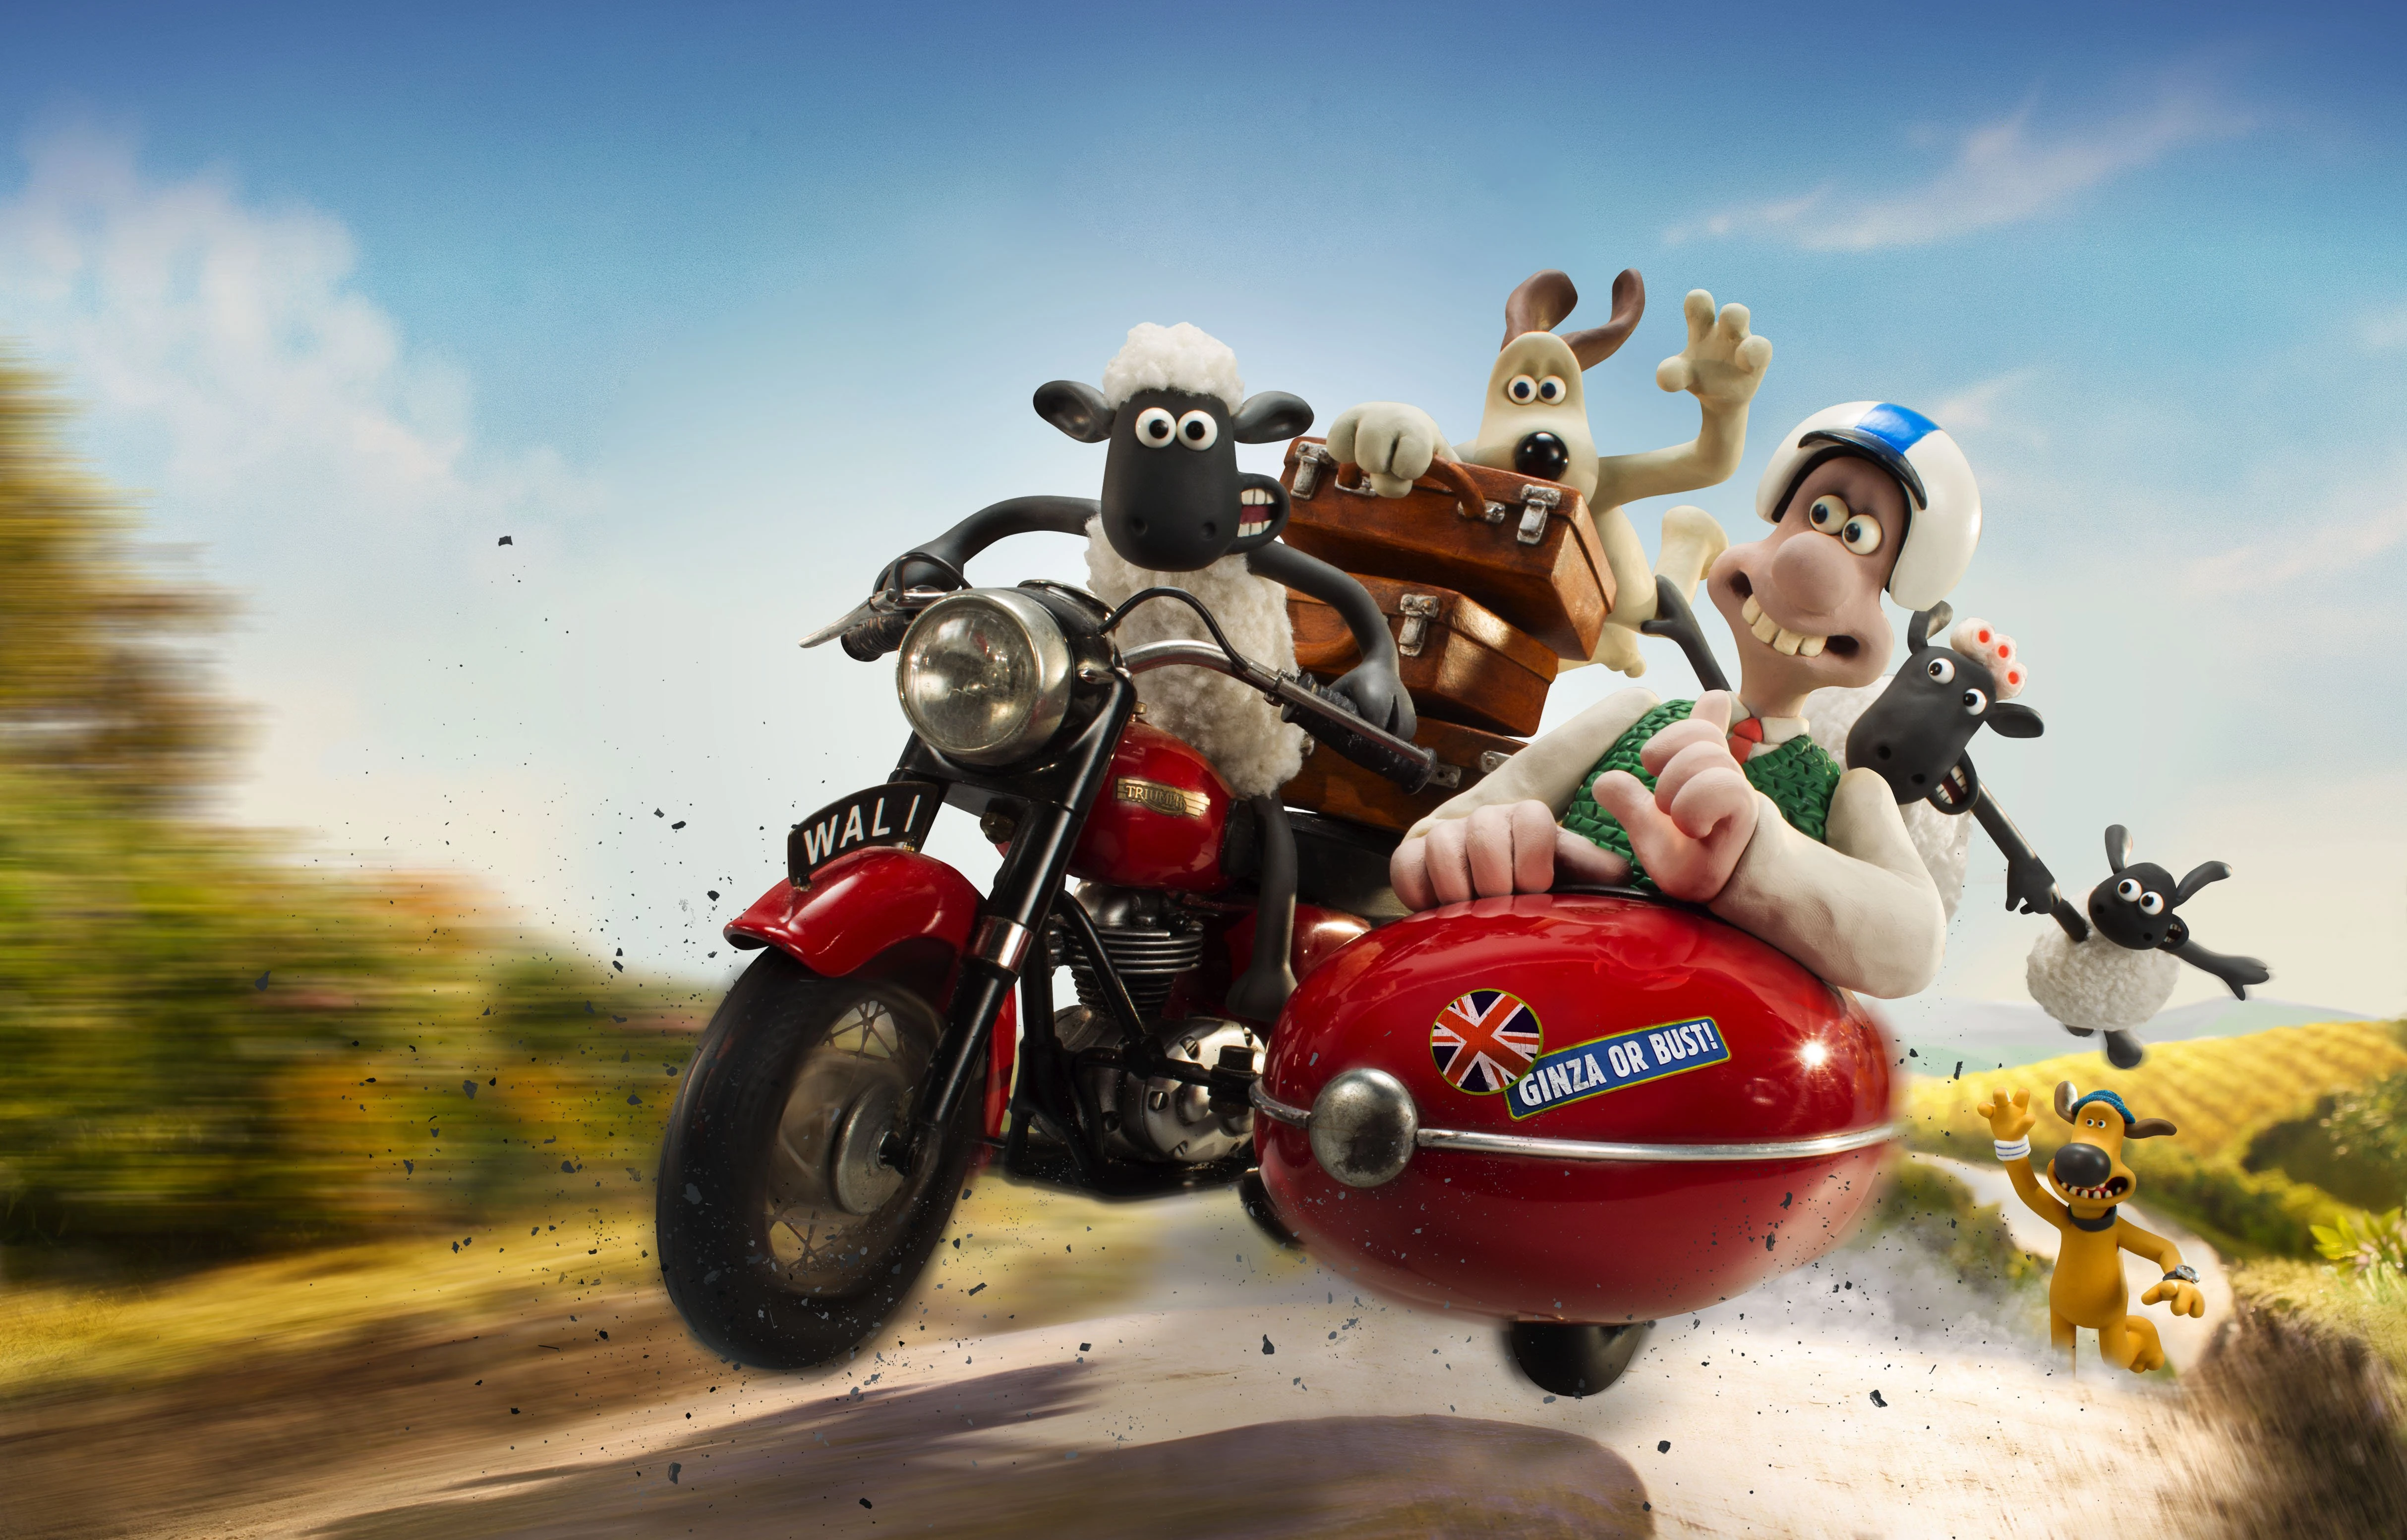 （C） 2015 Aardman Animations Limited and Studiocanal S.A.／（C） and TM Aardman Animations Ltd 2015.